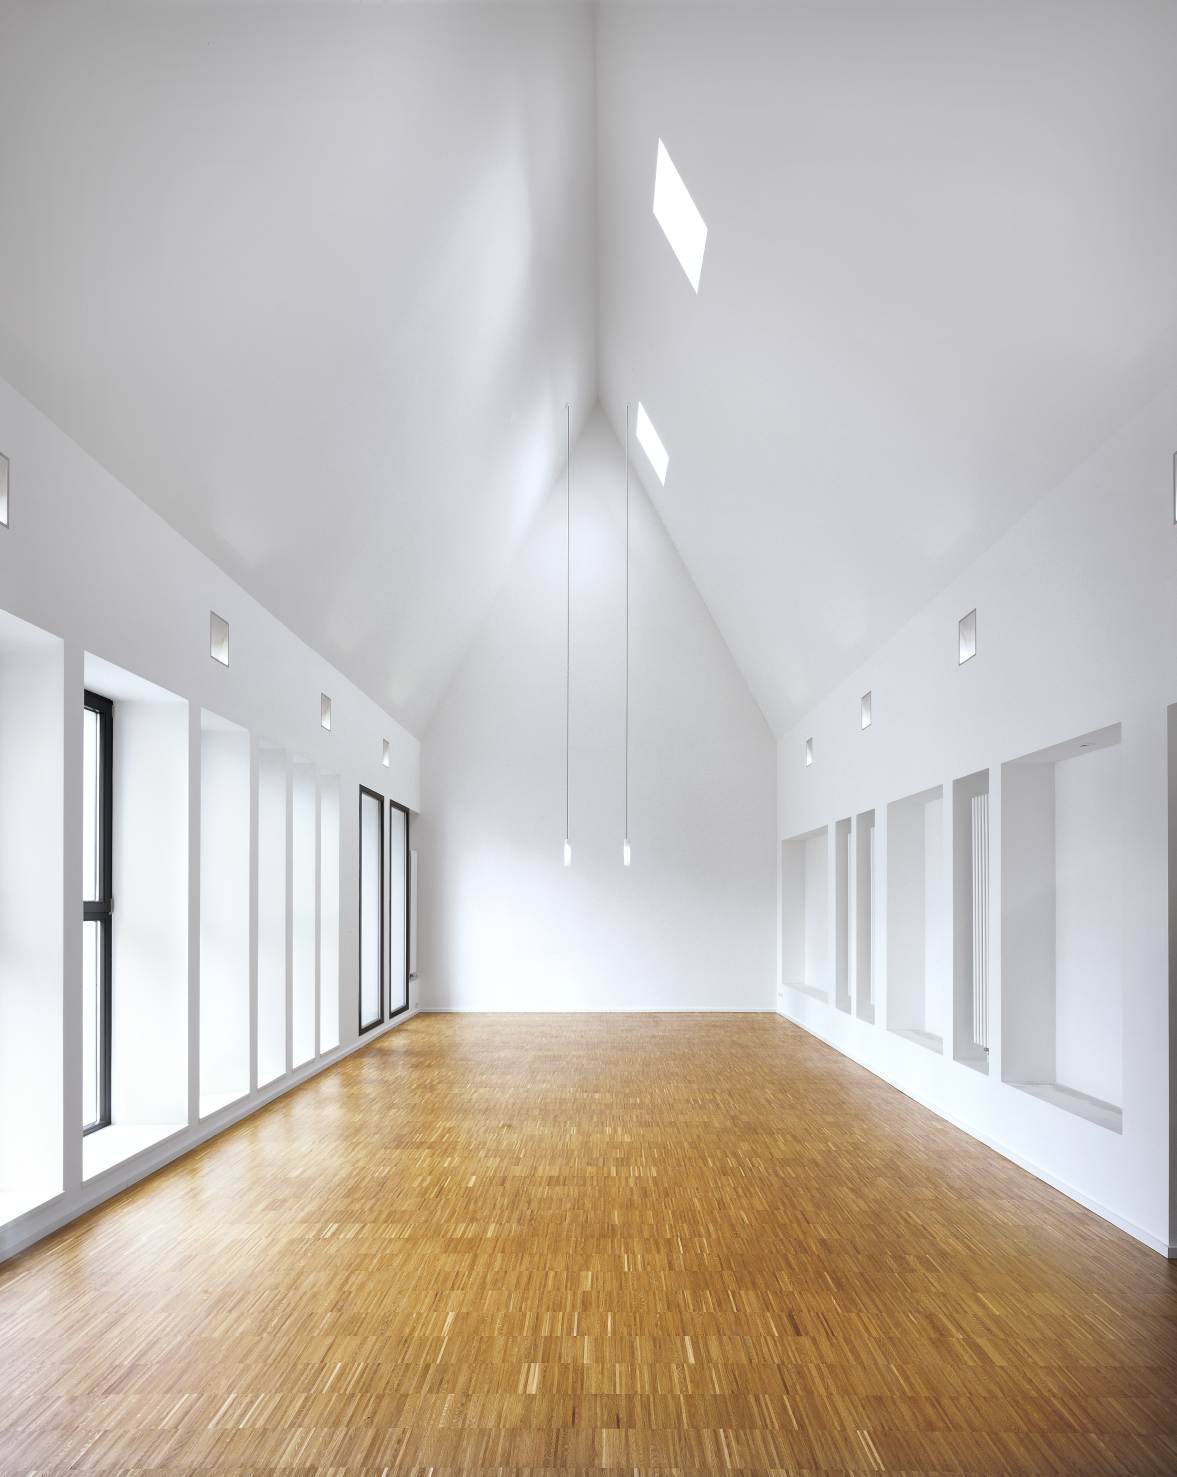 Re-Design and Revitalisation of the Listed Community Center of the Swedish Church in Frankfurt